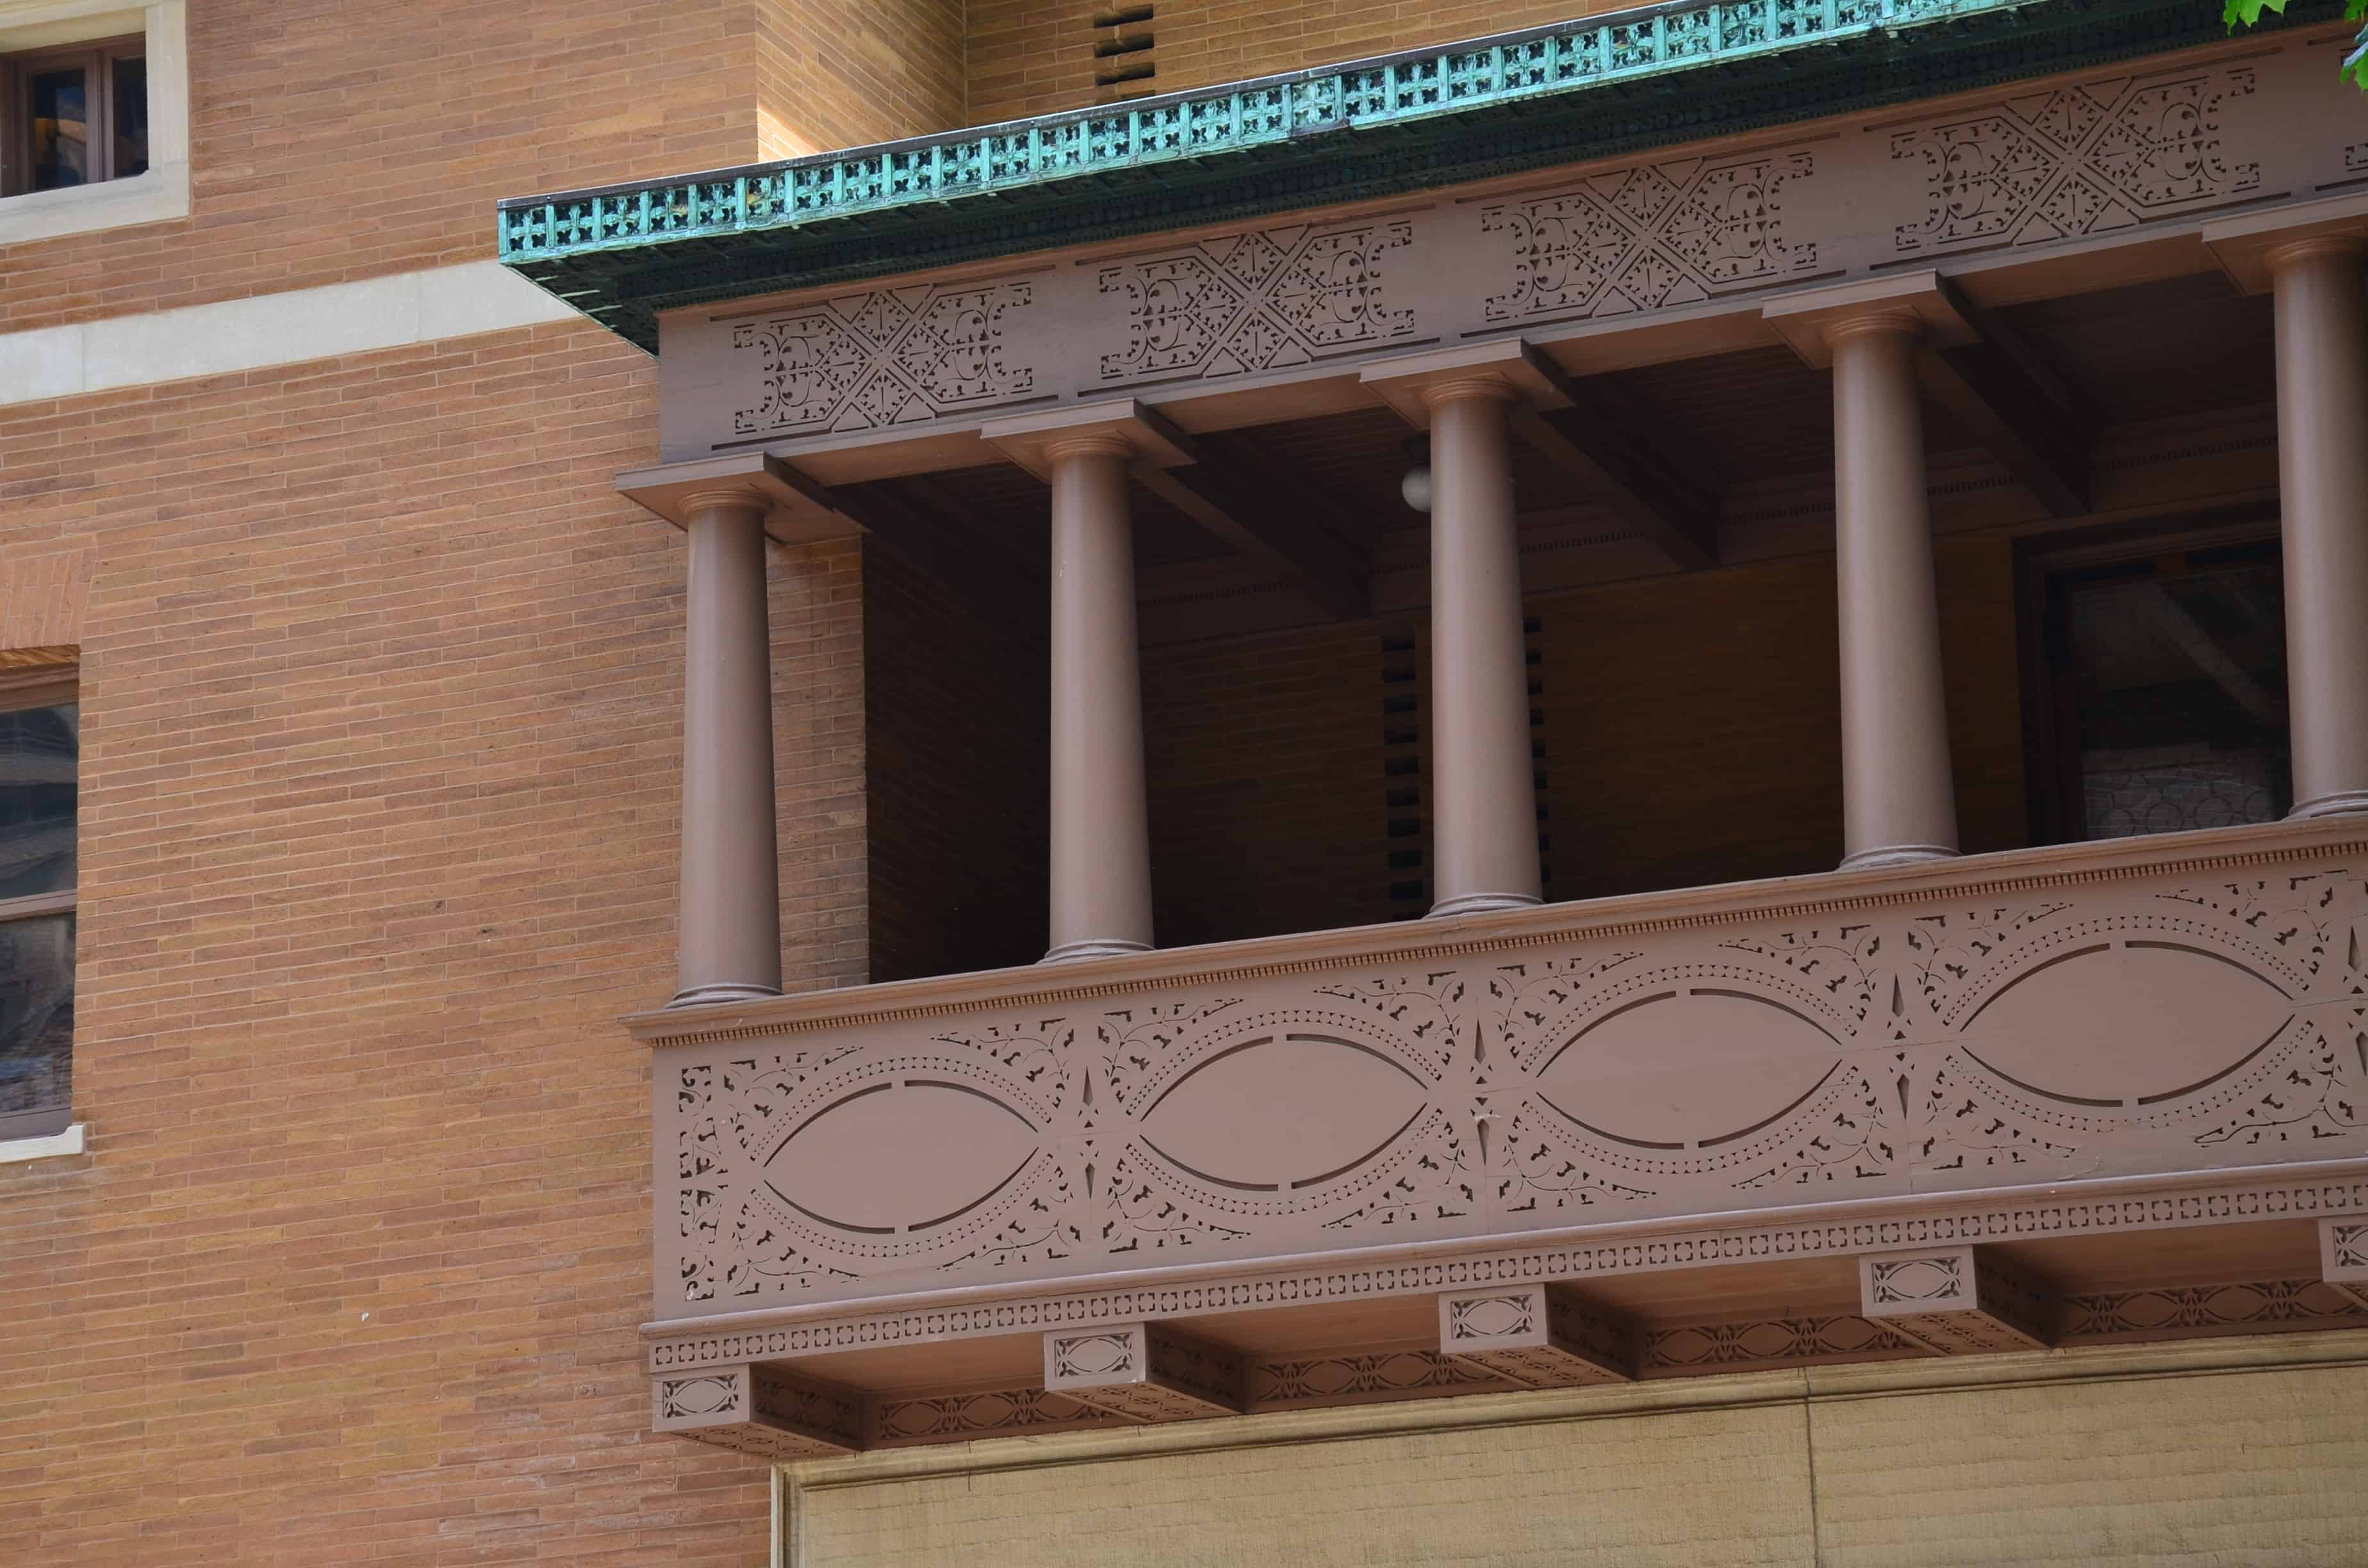 Balcony of the Charnley-Persky House in Chicago, Illinois